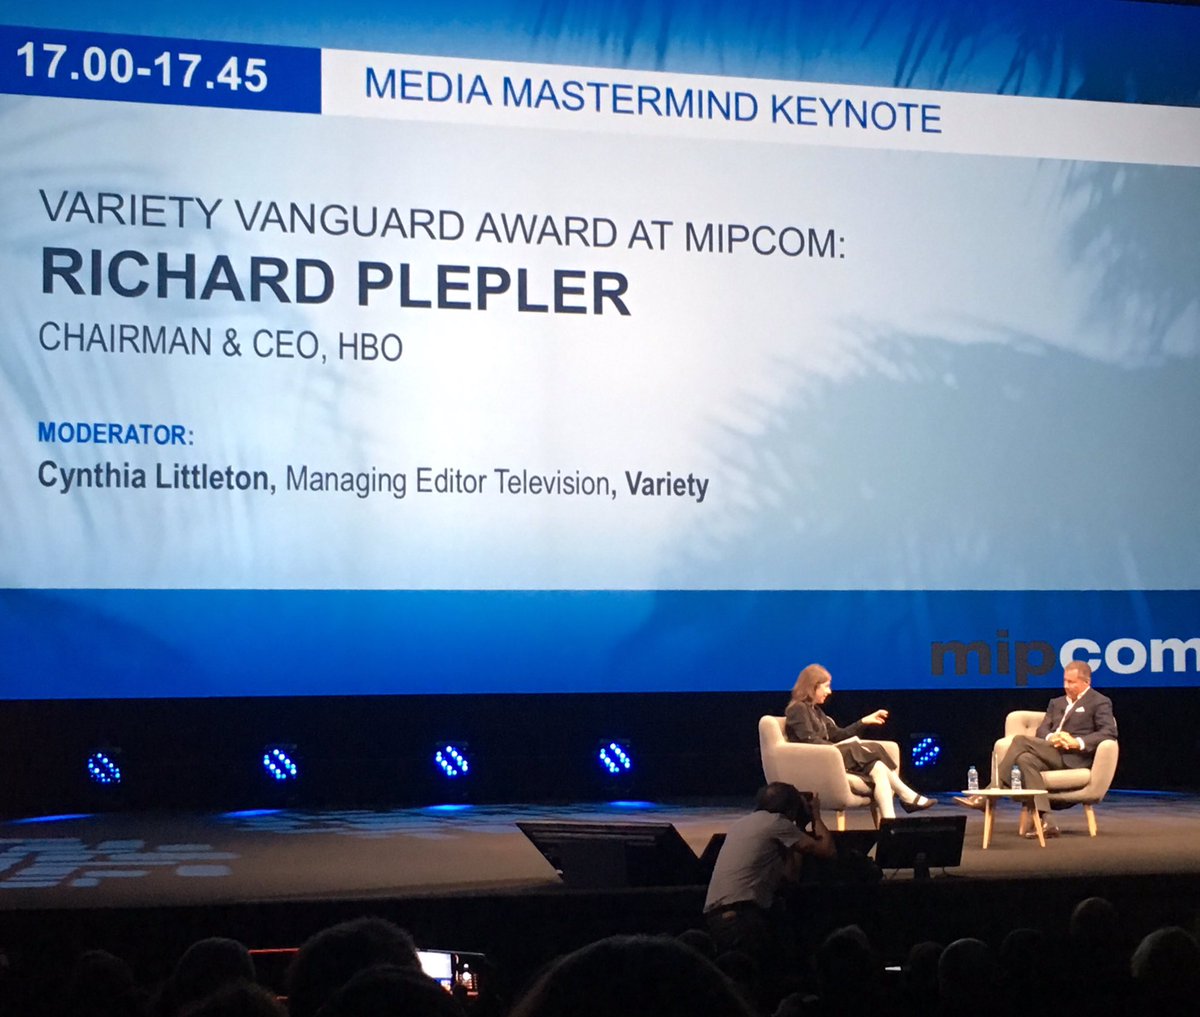 'Curate excellence' - Richard Plepler, CEO HBO. The right strategy for any broadcaster. #Mipcom2017